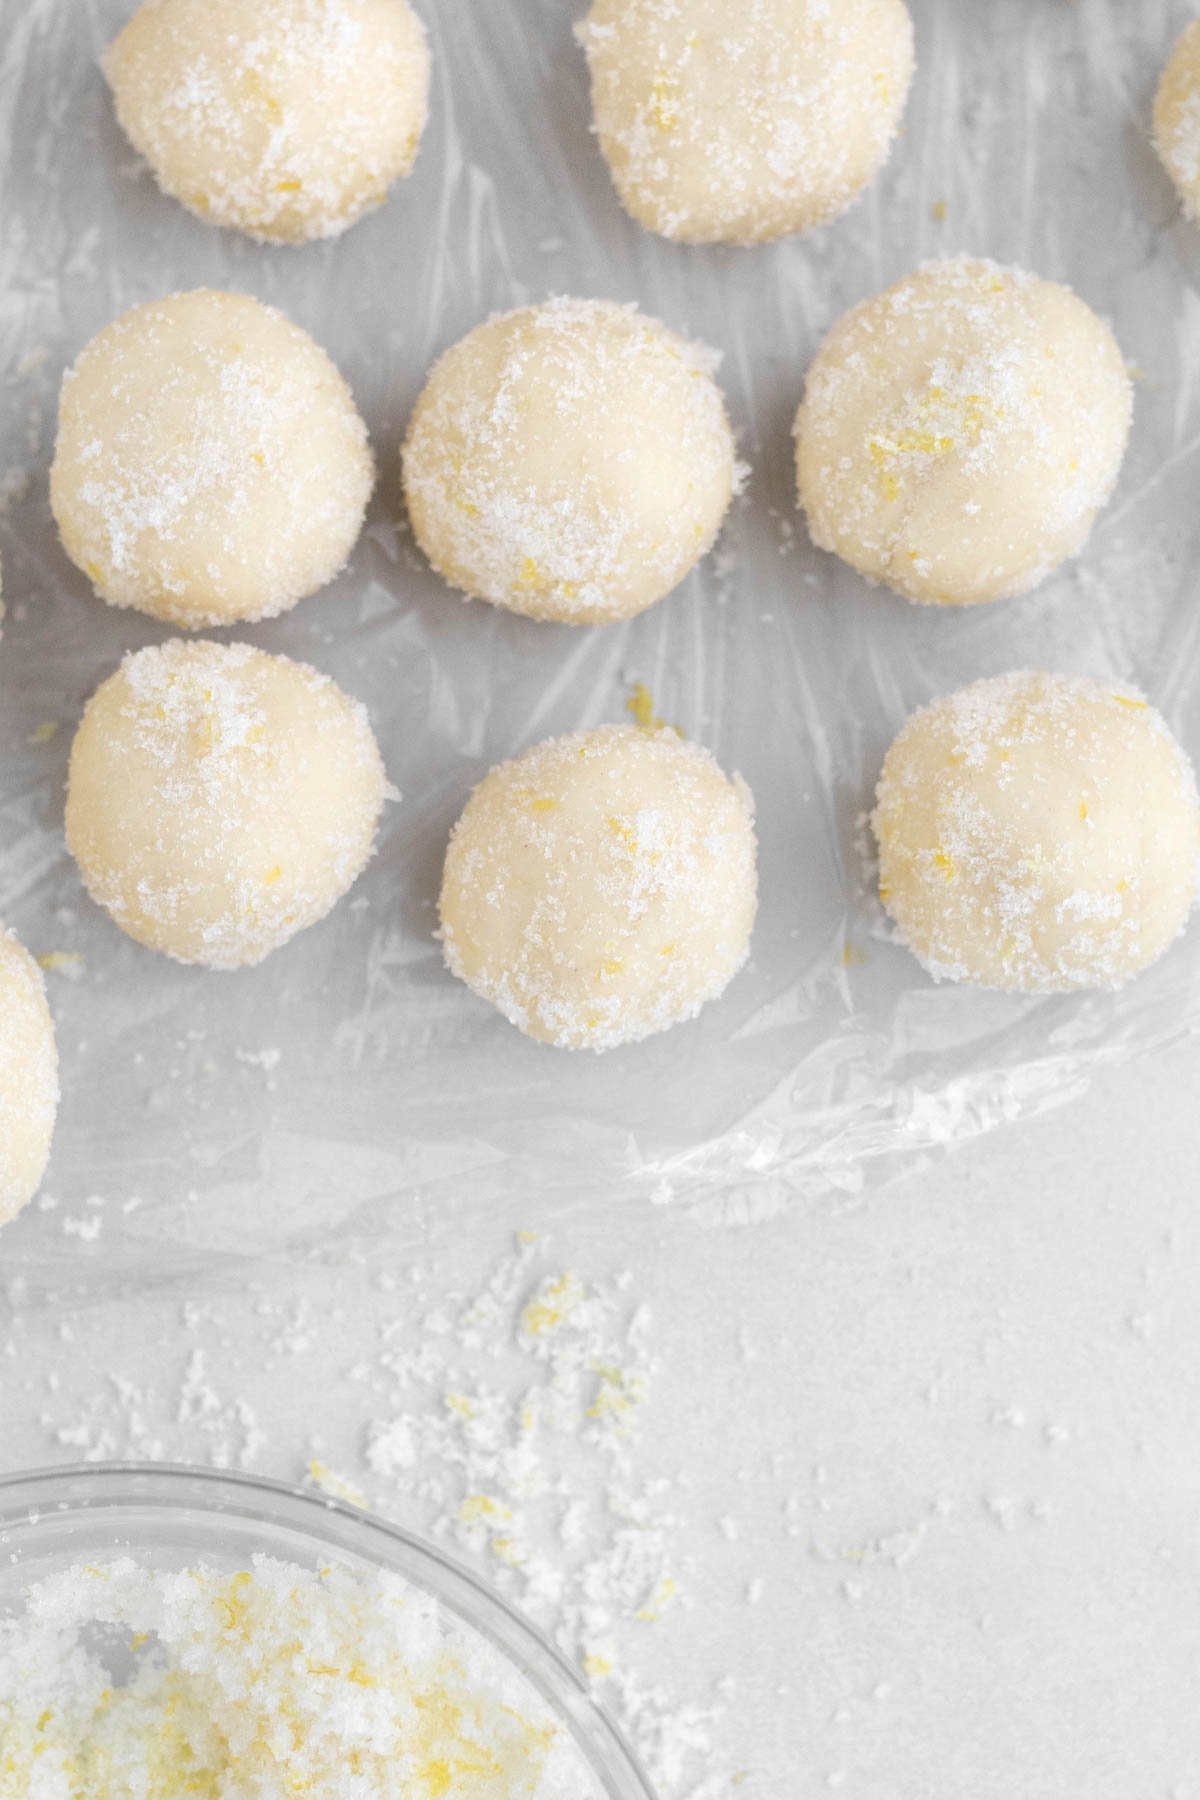 Cookie dough balls covered in granulated sugar.